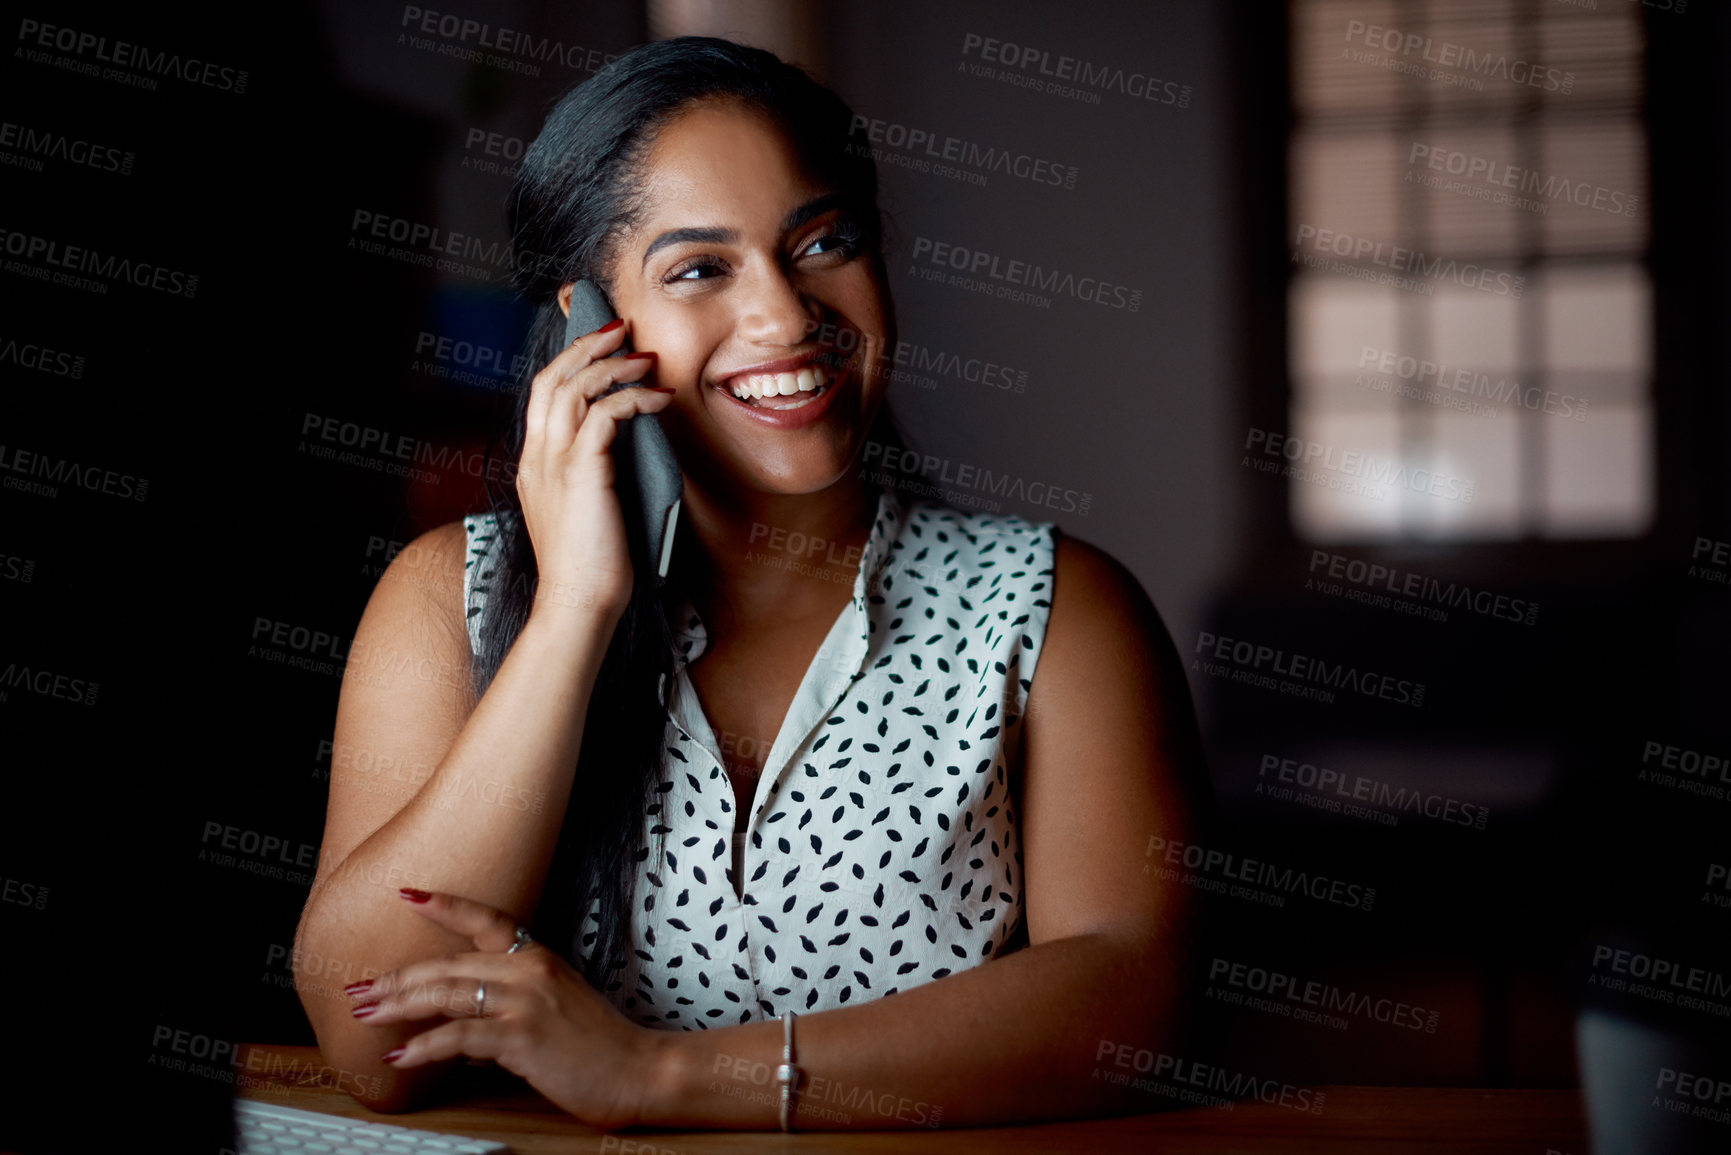 Buy stock photo Shot of a young businesswoman talking on a cellphone in an office at night